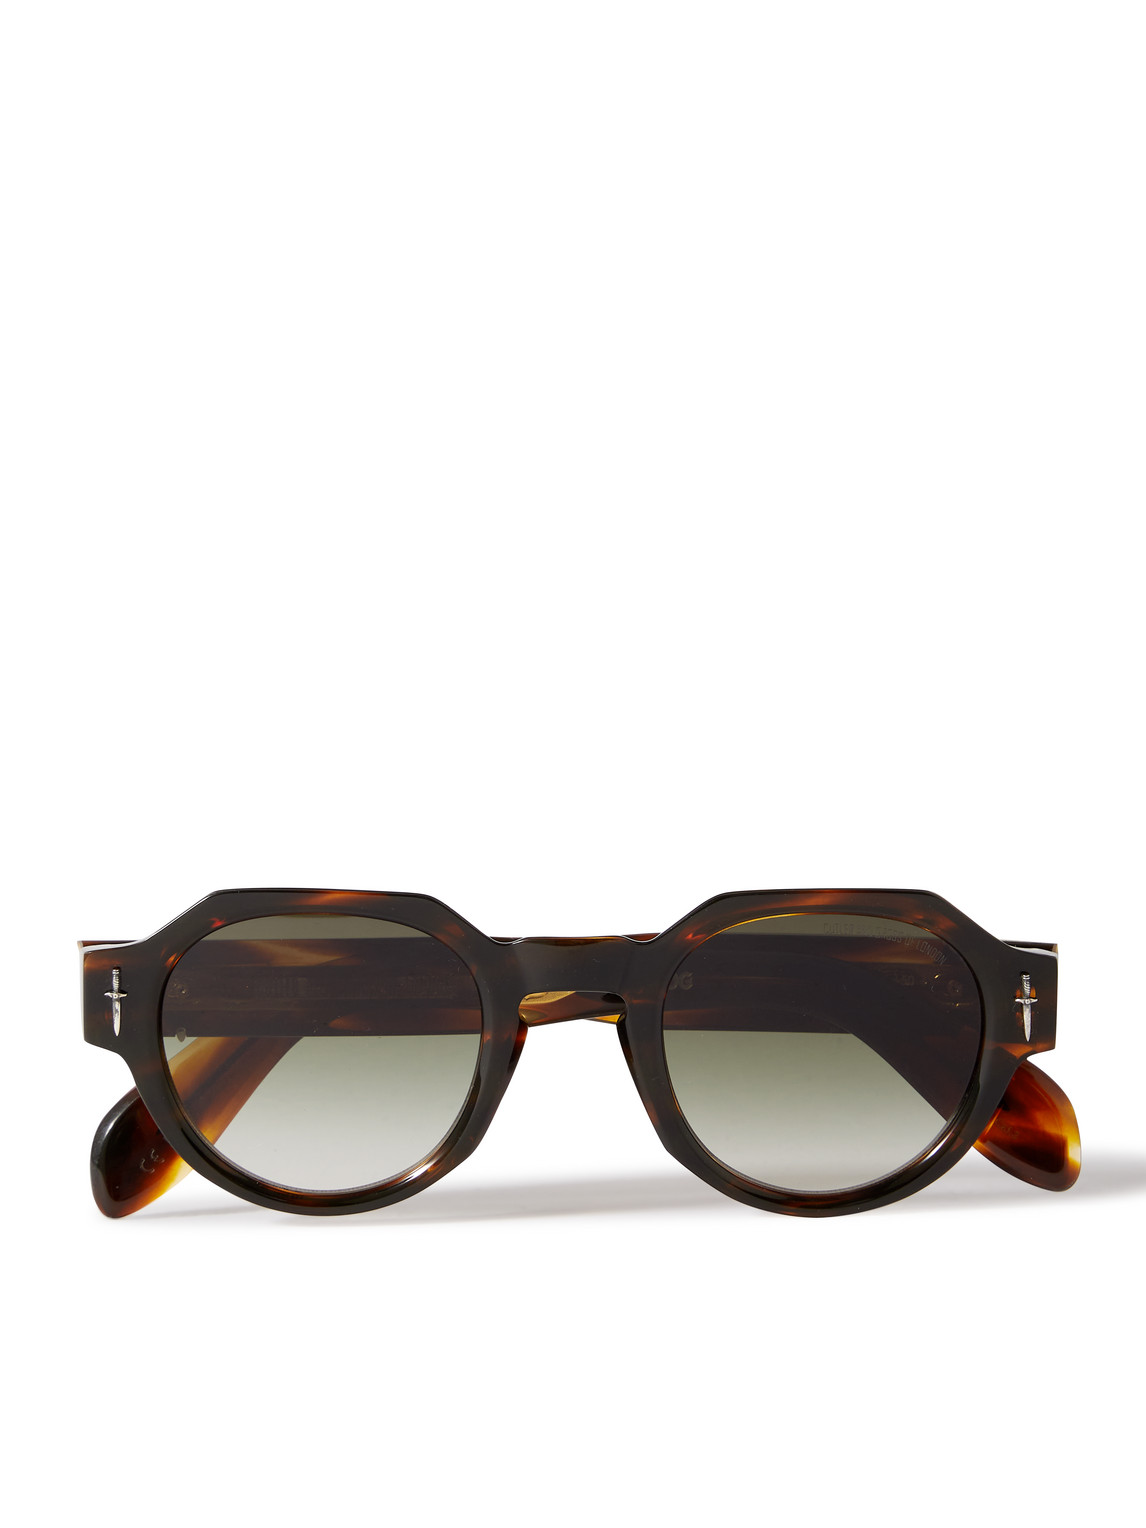 Cutler and Gross - The Great Frog 006 Round-Frame Acetate Sunglasses - Men - Tortoiseshell von Cutler and Gross